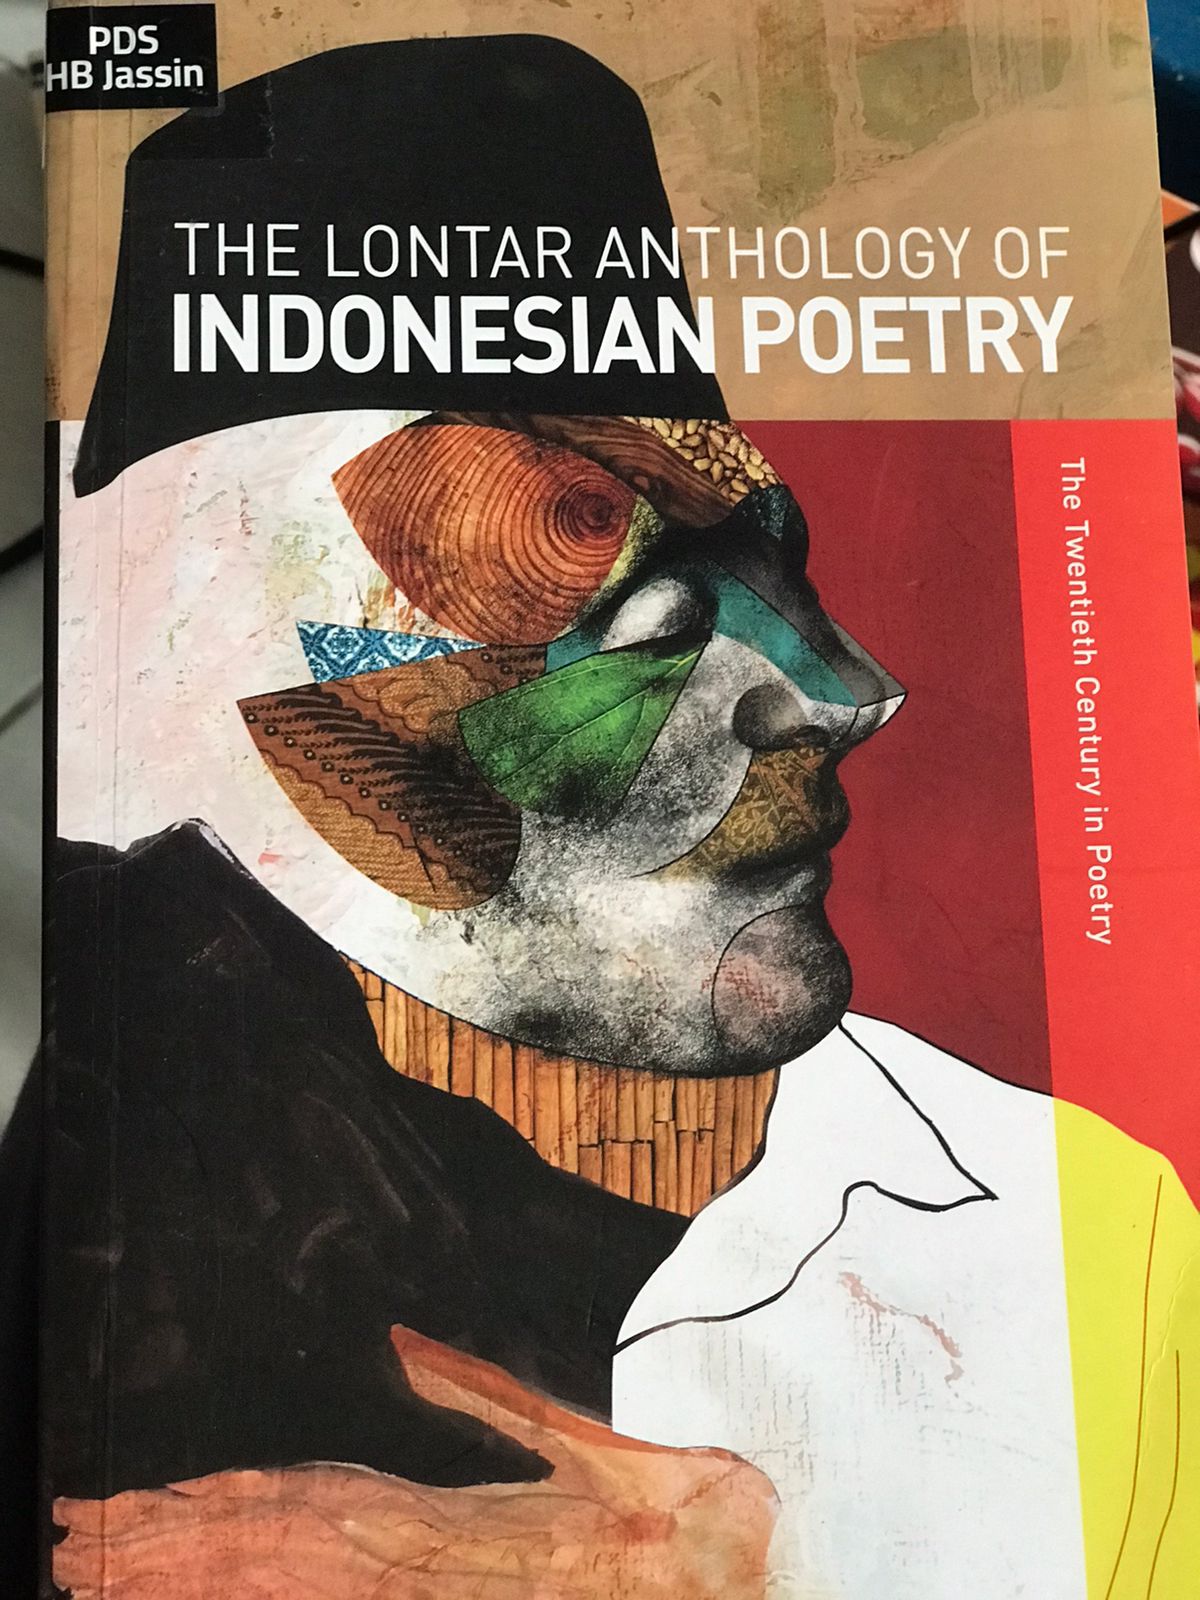 The lontar antholoy of Indonesian poetry